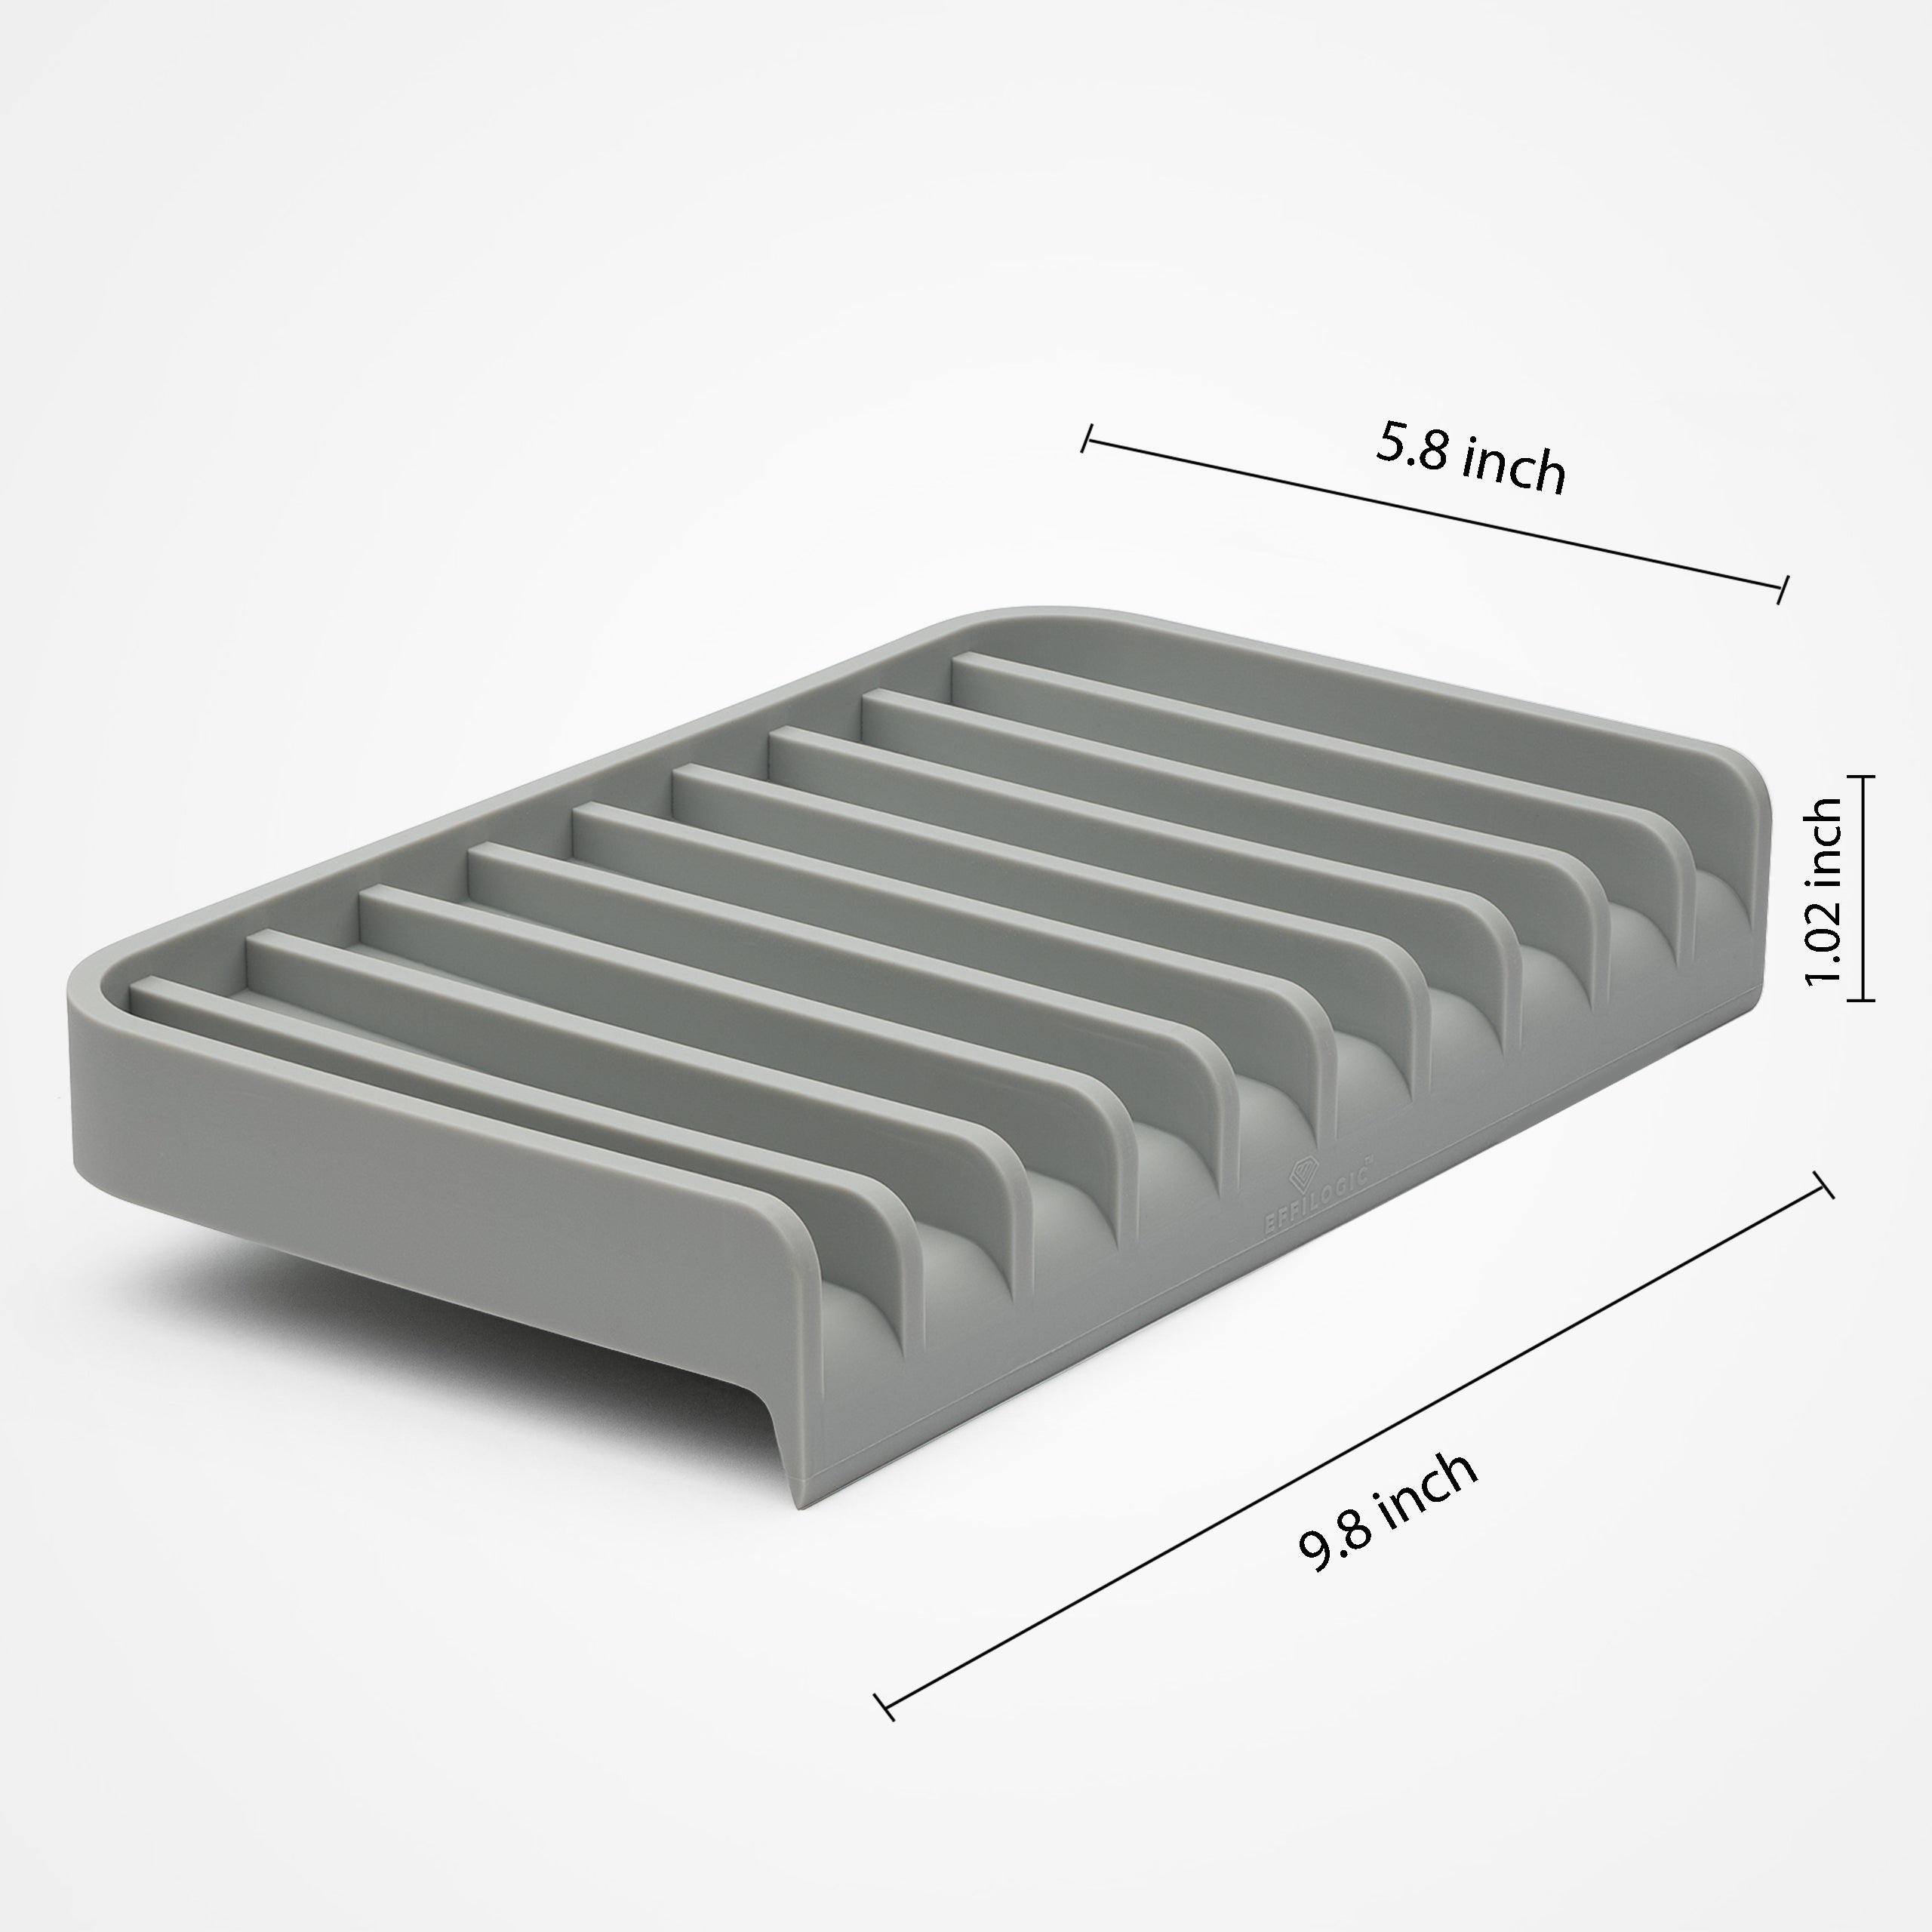 Silicone Sponge Holder for Kitchen Sink, 45 Degree Groove Drains